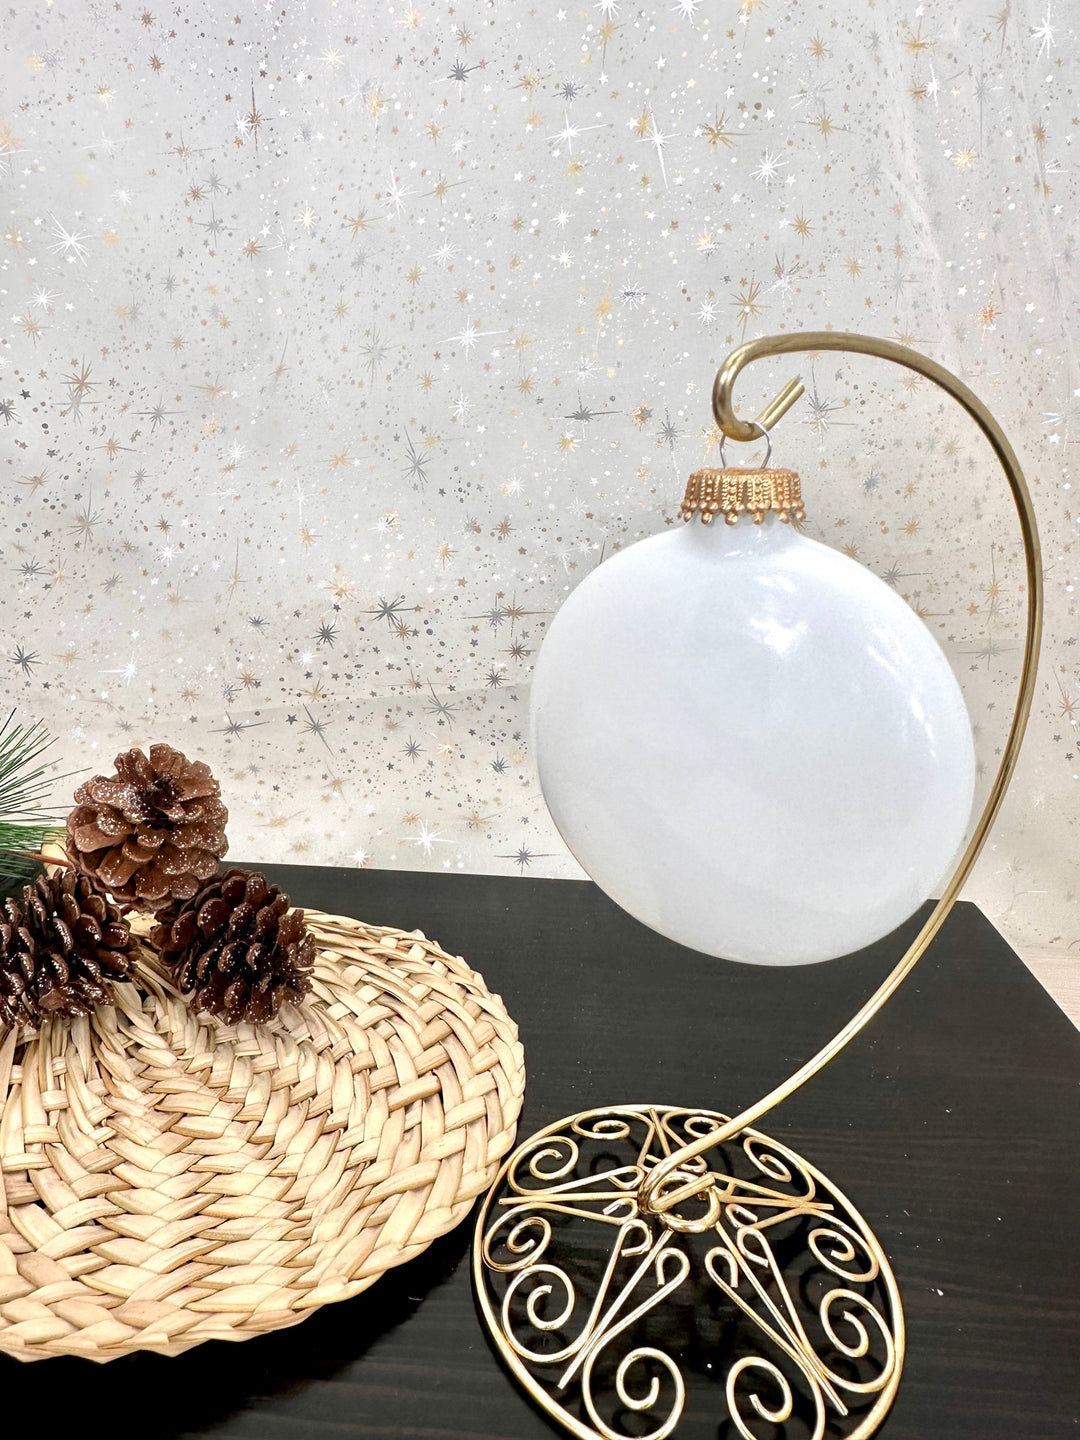 Christmas By Krebs 3 (76mm) Craft Glass Ornament [6 Pieces], Designer  Heirloom (Porcelain White with Gold Crown Caps)